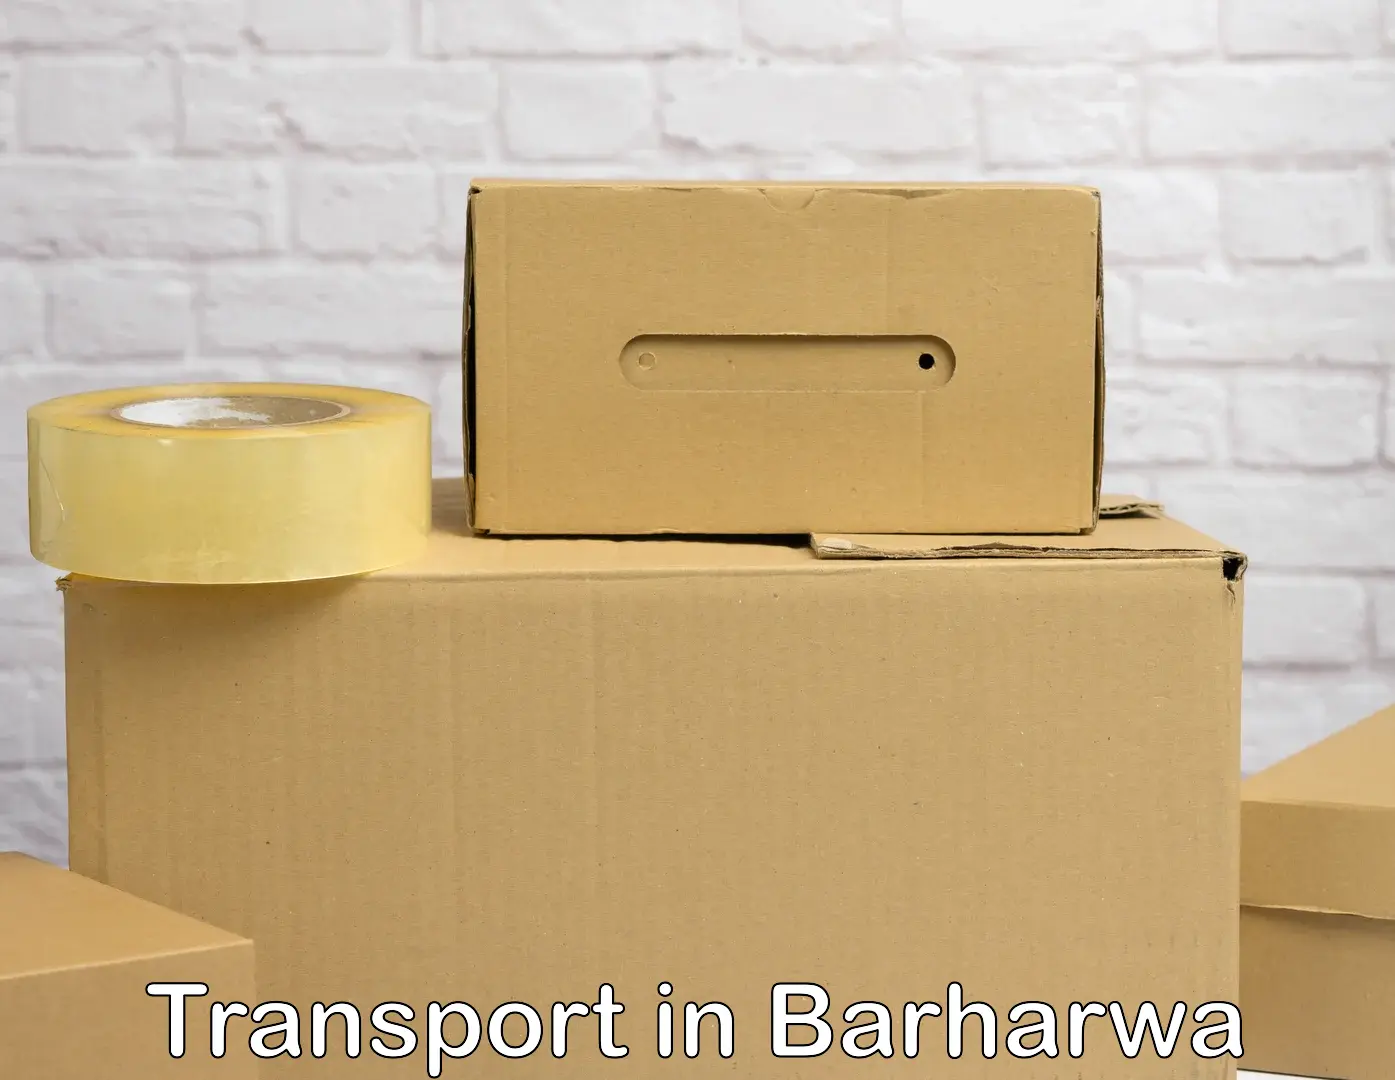 Transportation services in Barharwa